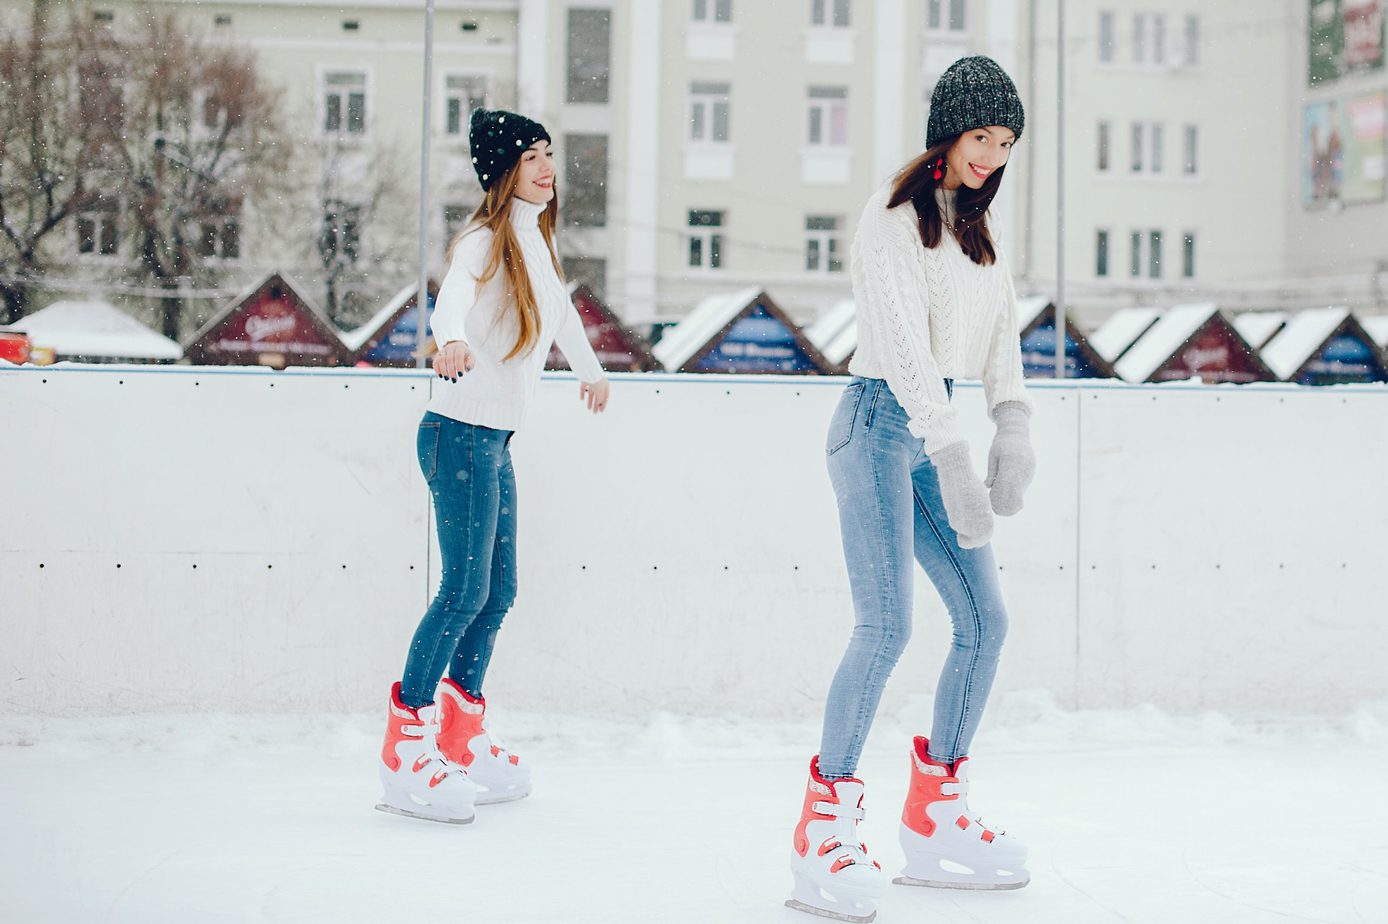 Fitness on skates – a woman’s way to winter relaxation